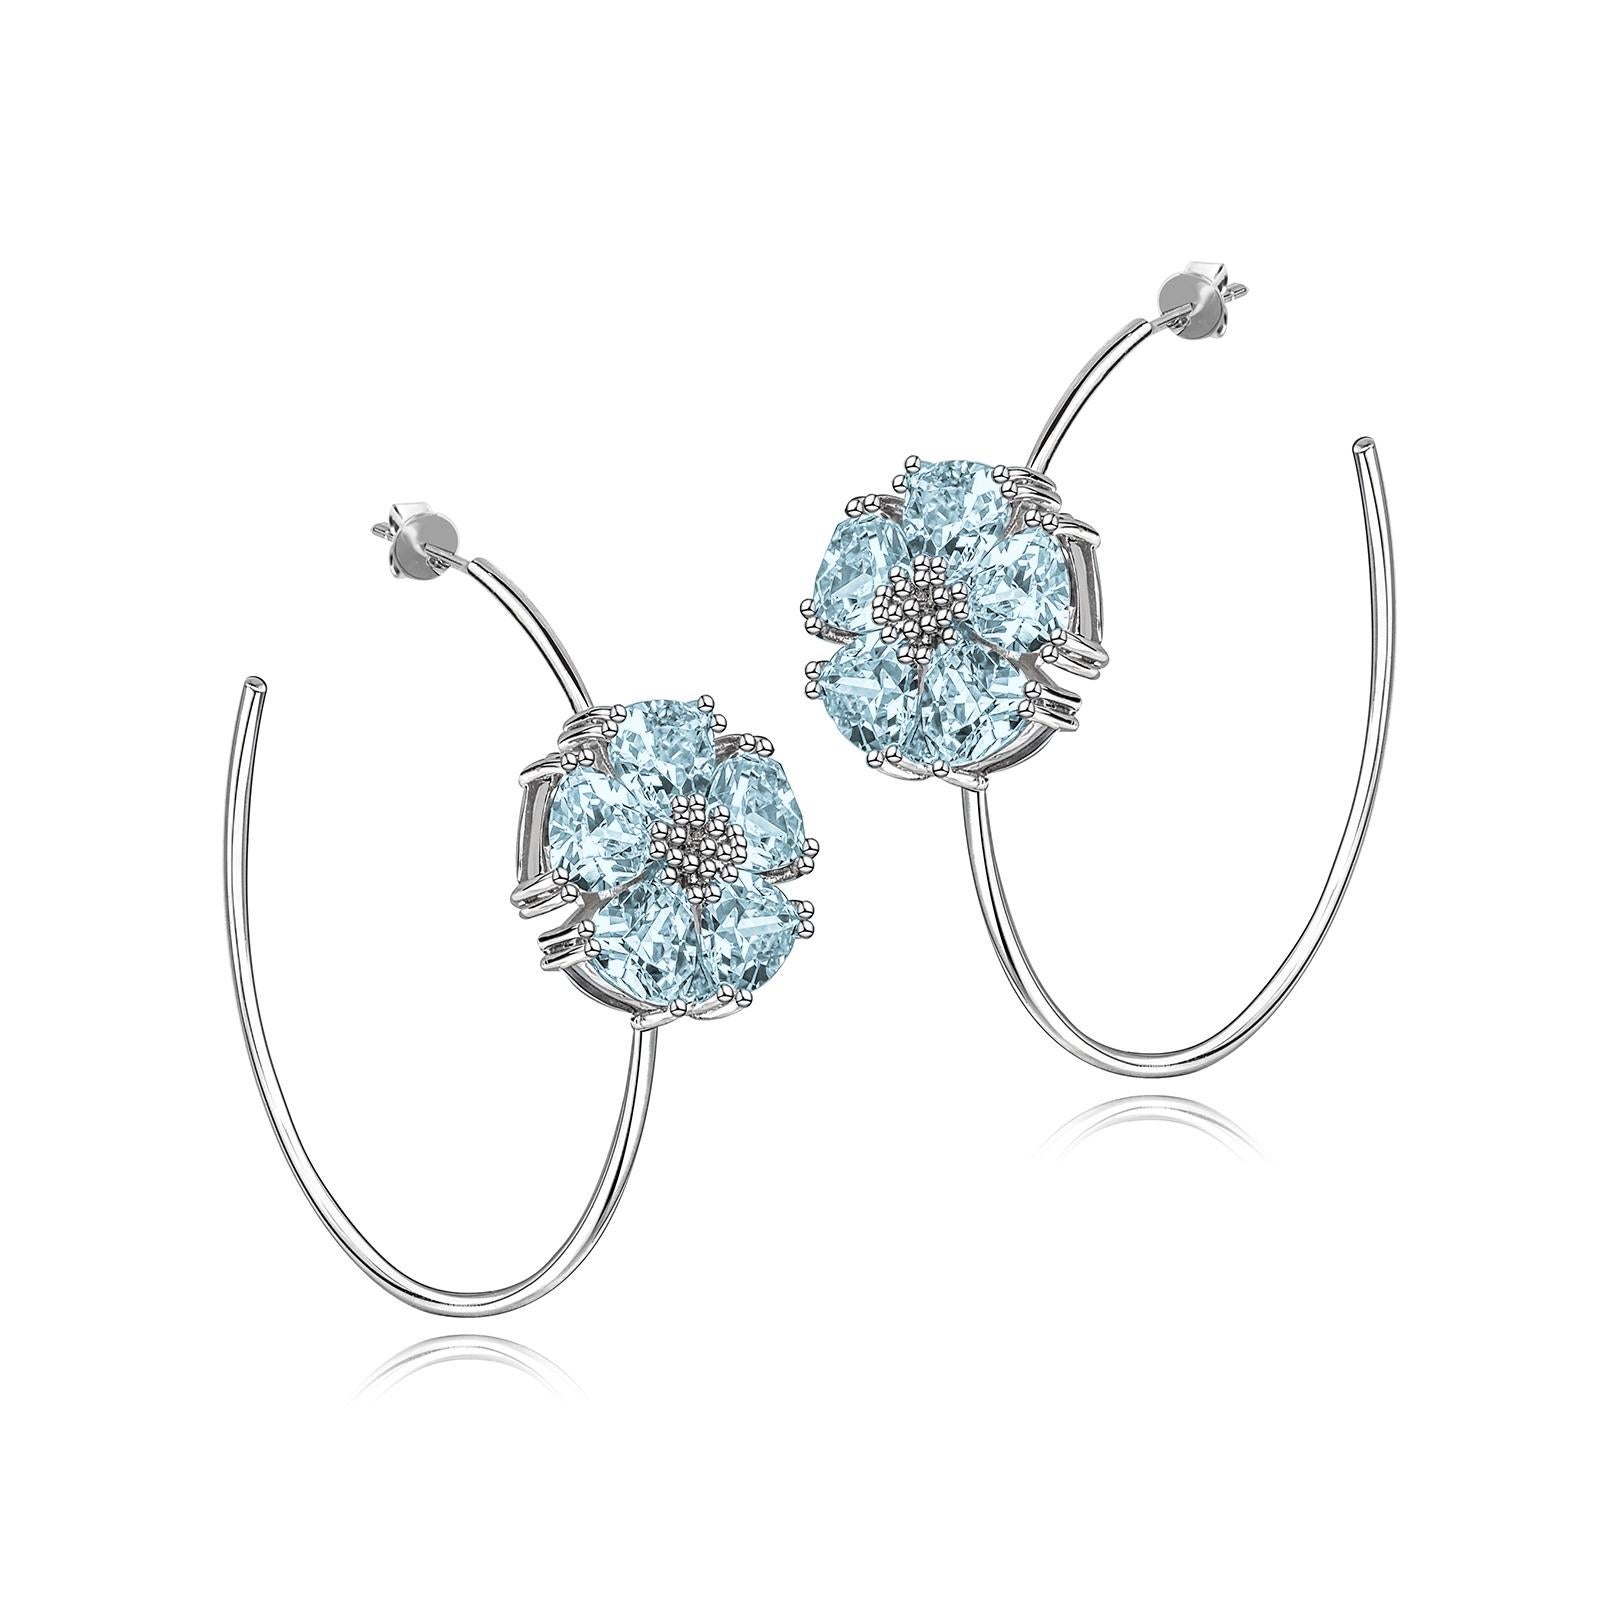 Designed in NYC

.925 Sterling Silver 2 x 20 mm Dark Blue Topaz Blossom Stone Open Hoops. No matter the season, allow natural beauty to surround you wherever you go. Blossom stone open hoops: 

Sterling silver 
High-polish finish 
Light-weight 
2 x